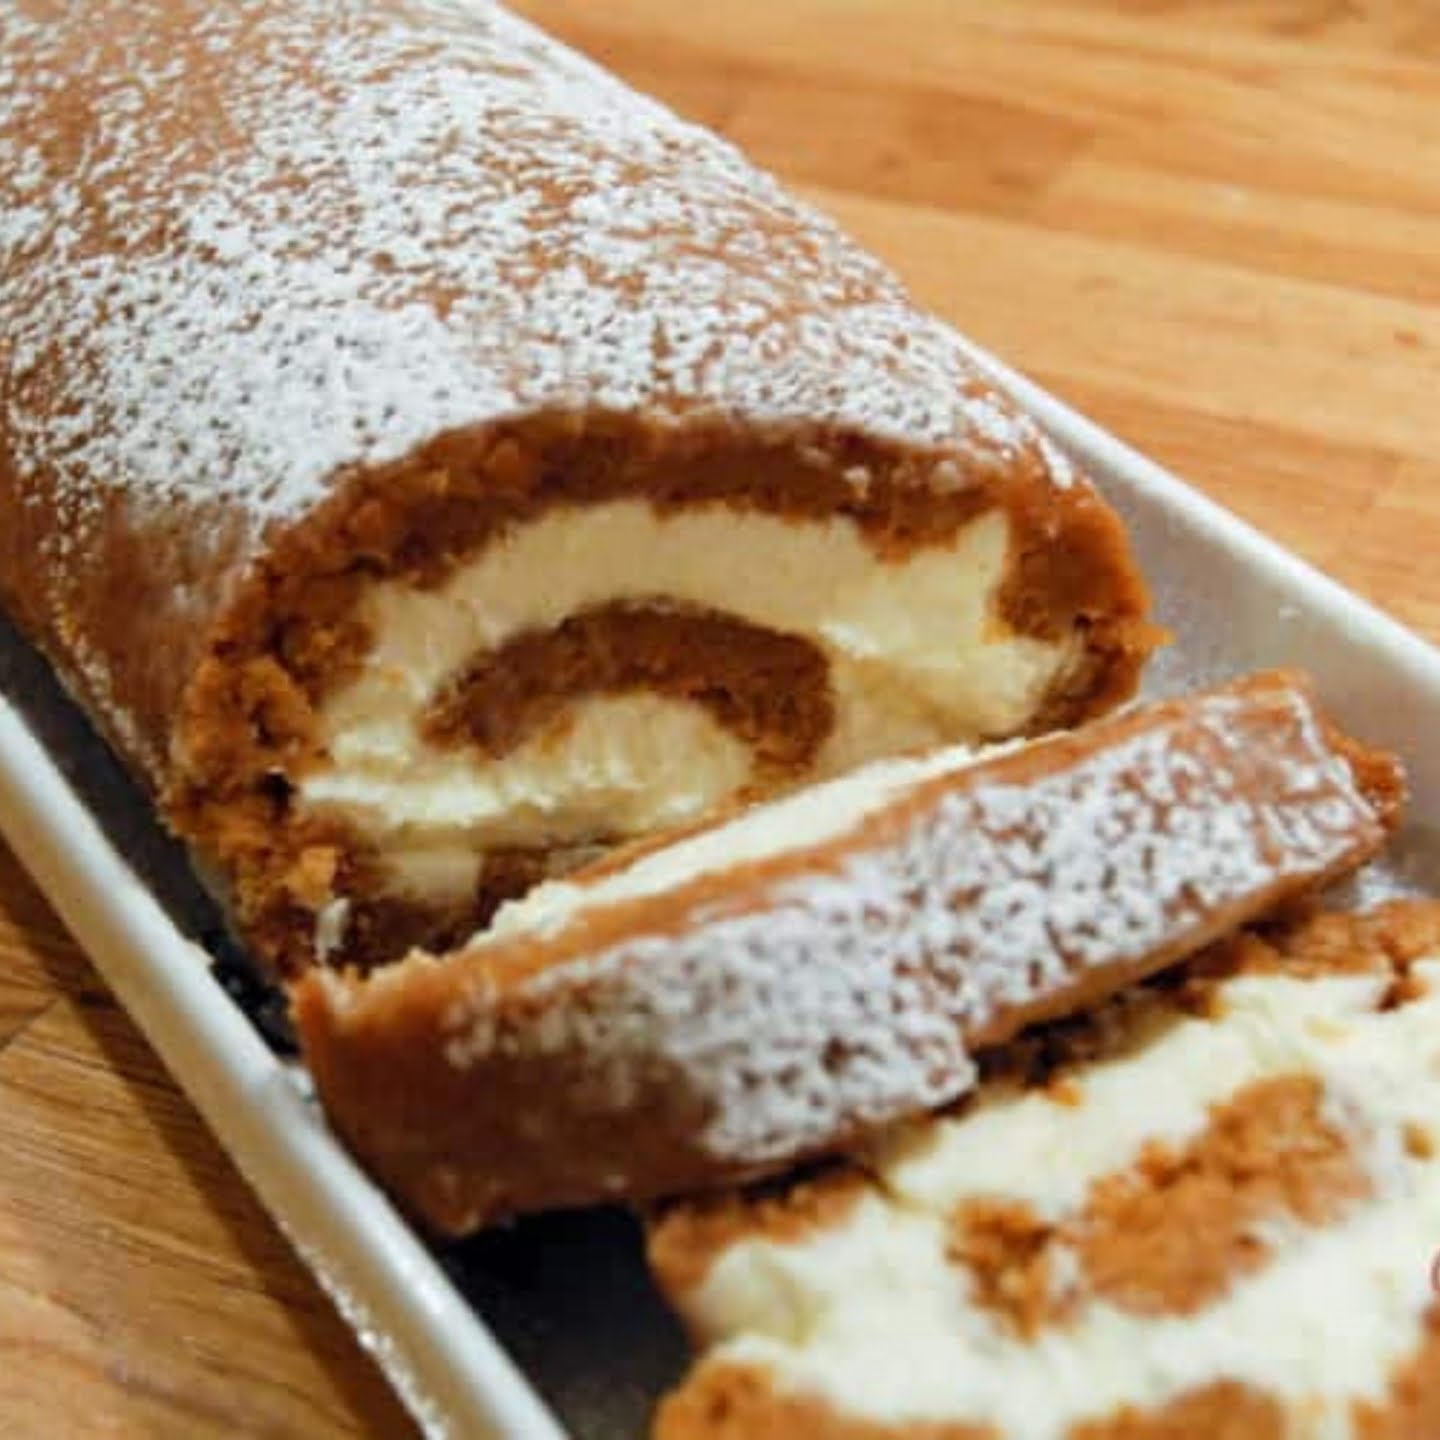 SPICED PUMPKIN ROLL CAKE WITH CREAM CHEESE FILLING